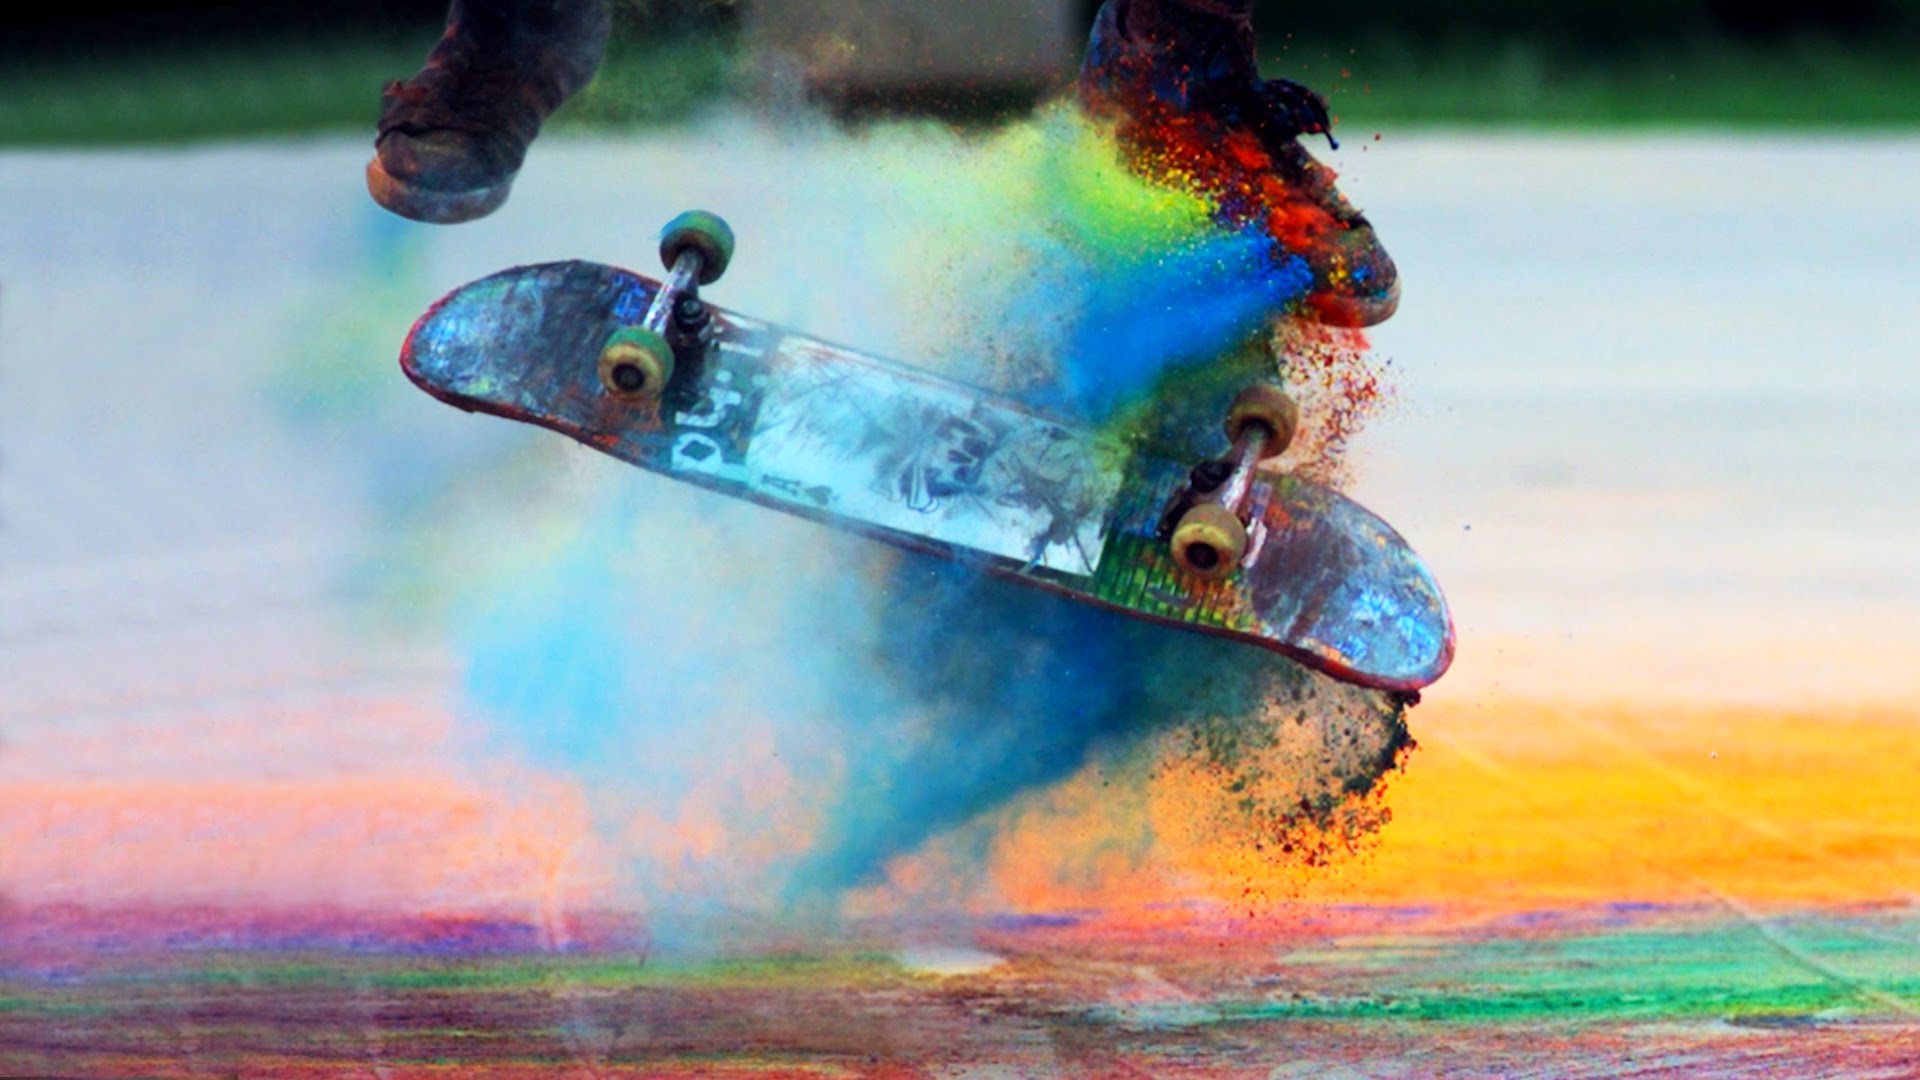 Skateboarding Wallpapers High Quality | Download Free